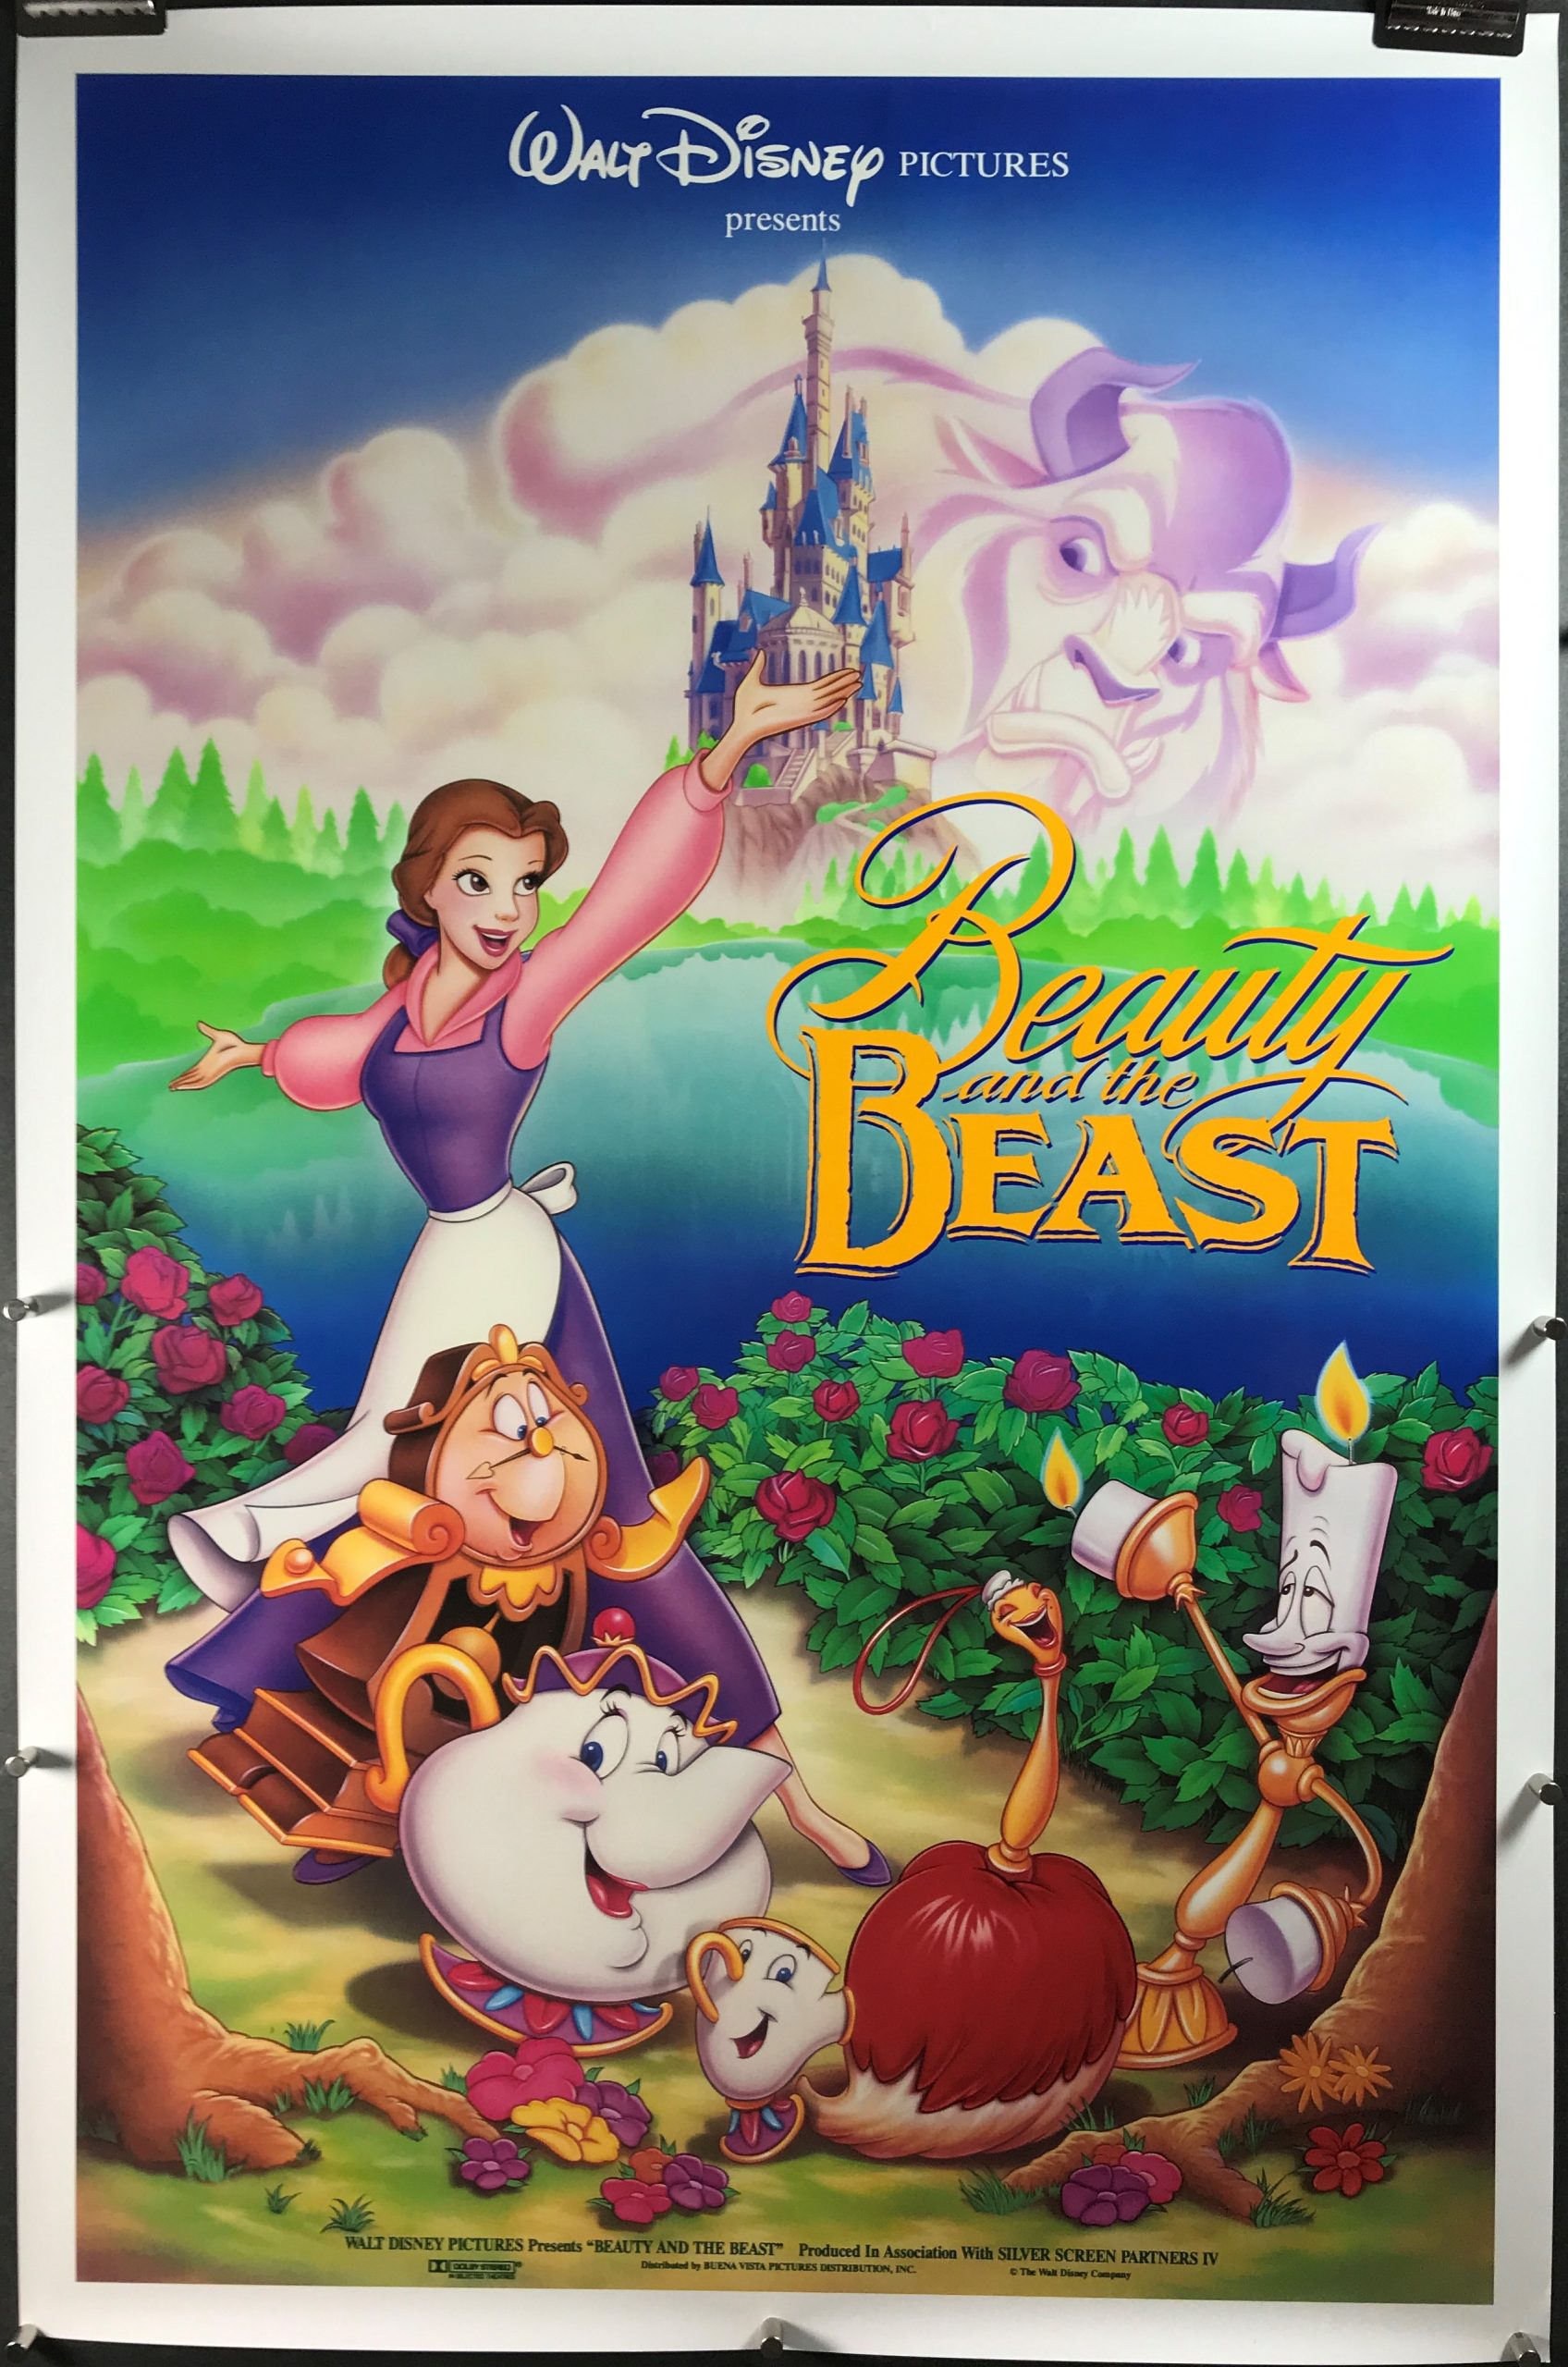 Vintage Beauty and the Beast Movie Poster// Classic Disney Movie Poster//Movie P